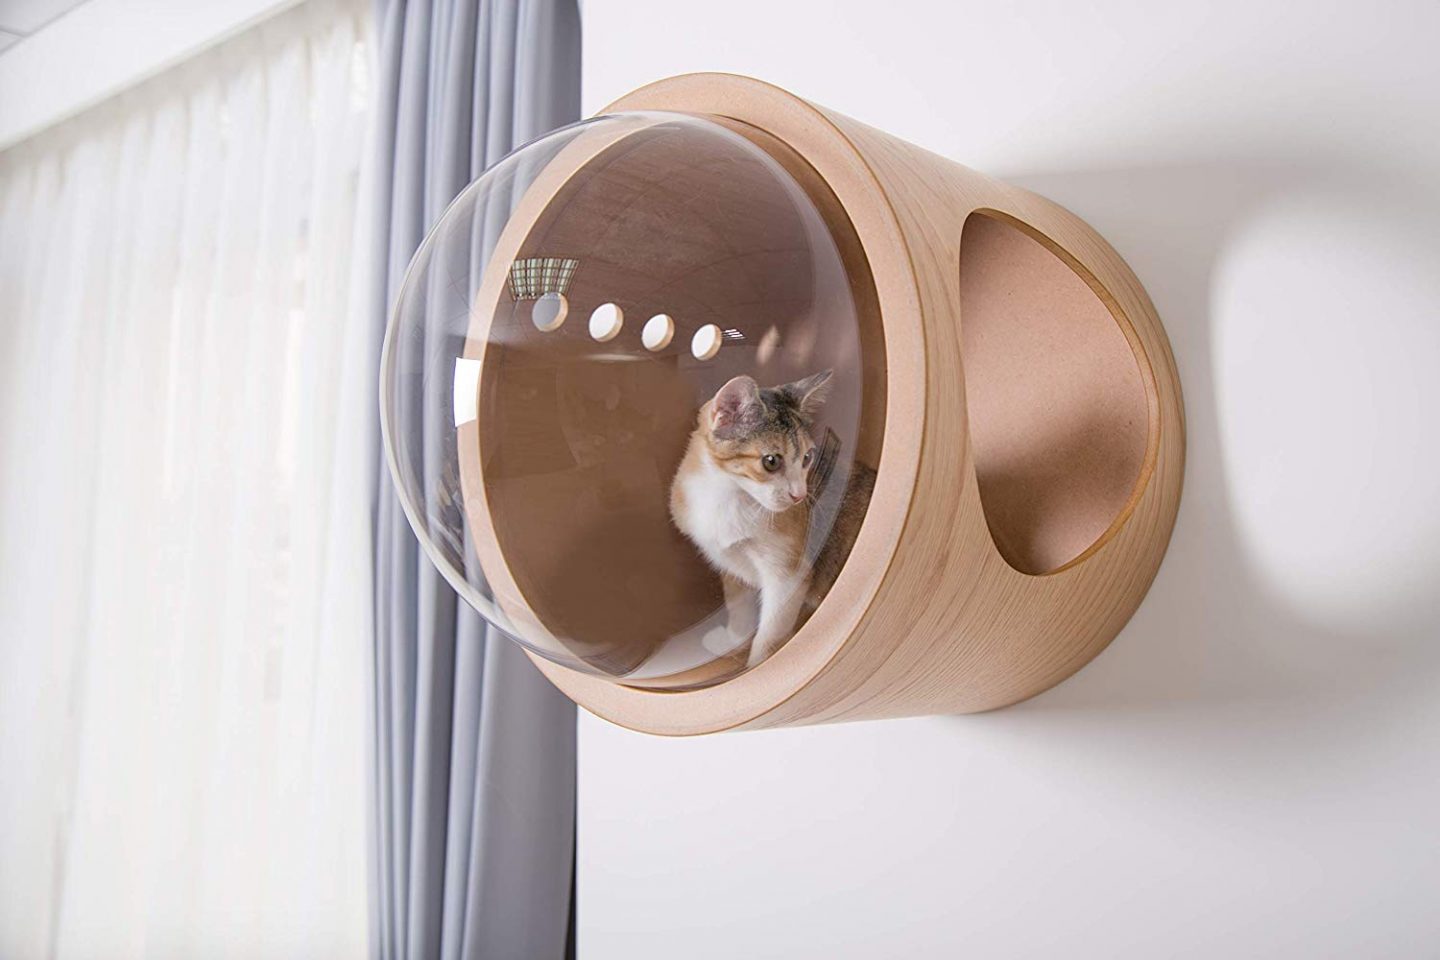 A modern cat wall shelf that almost makes you feel like you're in an aquarium.  It's like one of those bubble tanks you can go inside to see the fish.